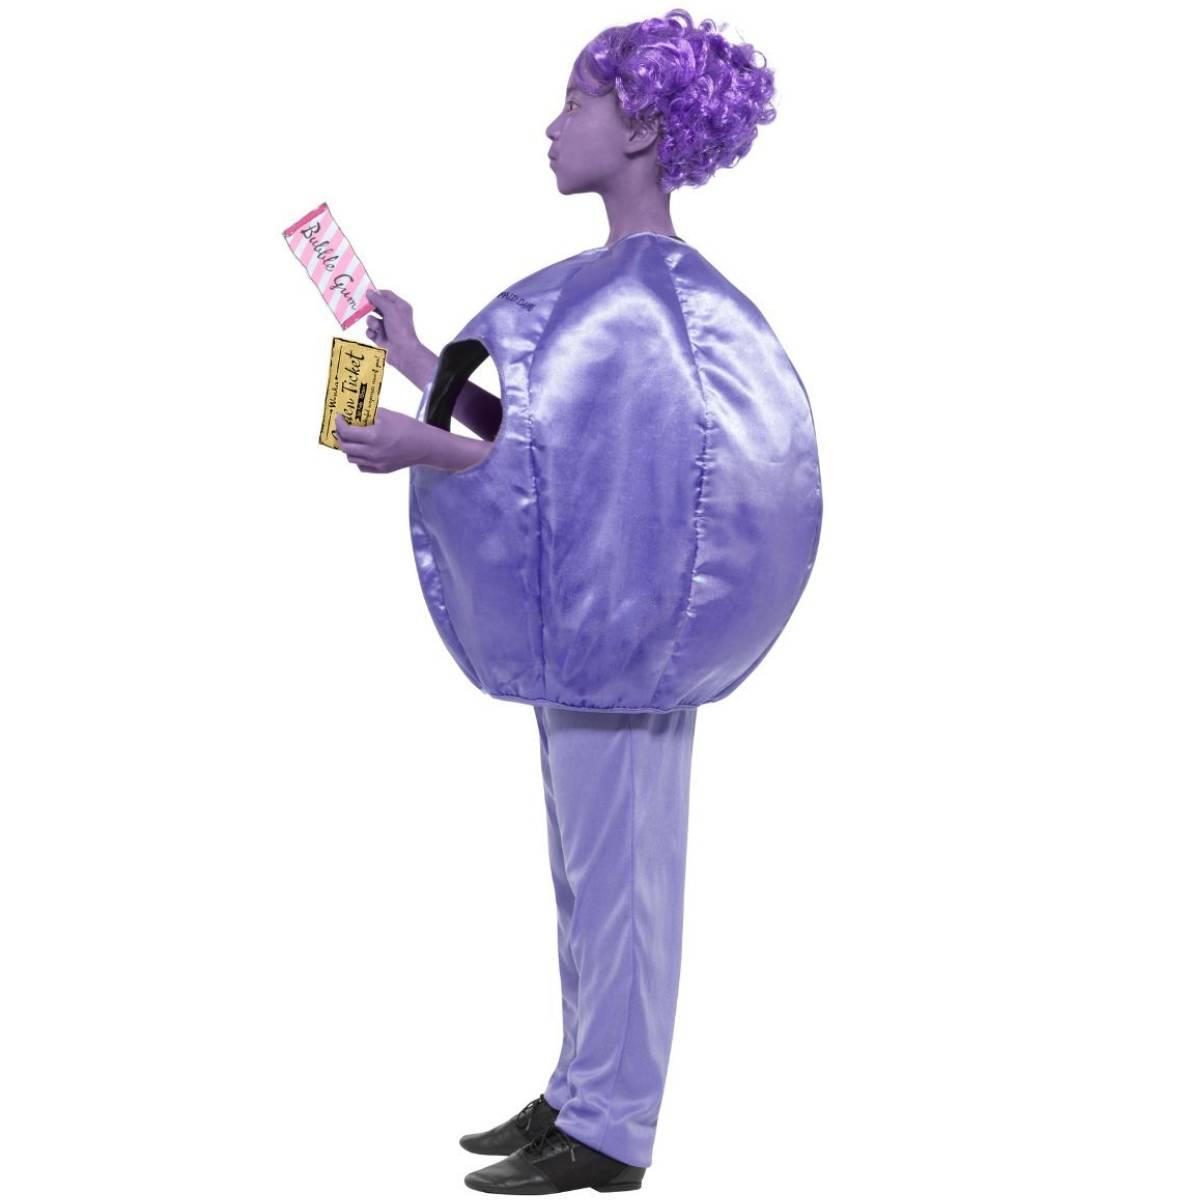 Side view of our deluxe padded official Roald Dahl Violet Beauregarde Fancy Dress Costume for Girls by Smiffys 41542 available here at Karnival Costumes online party shop